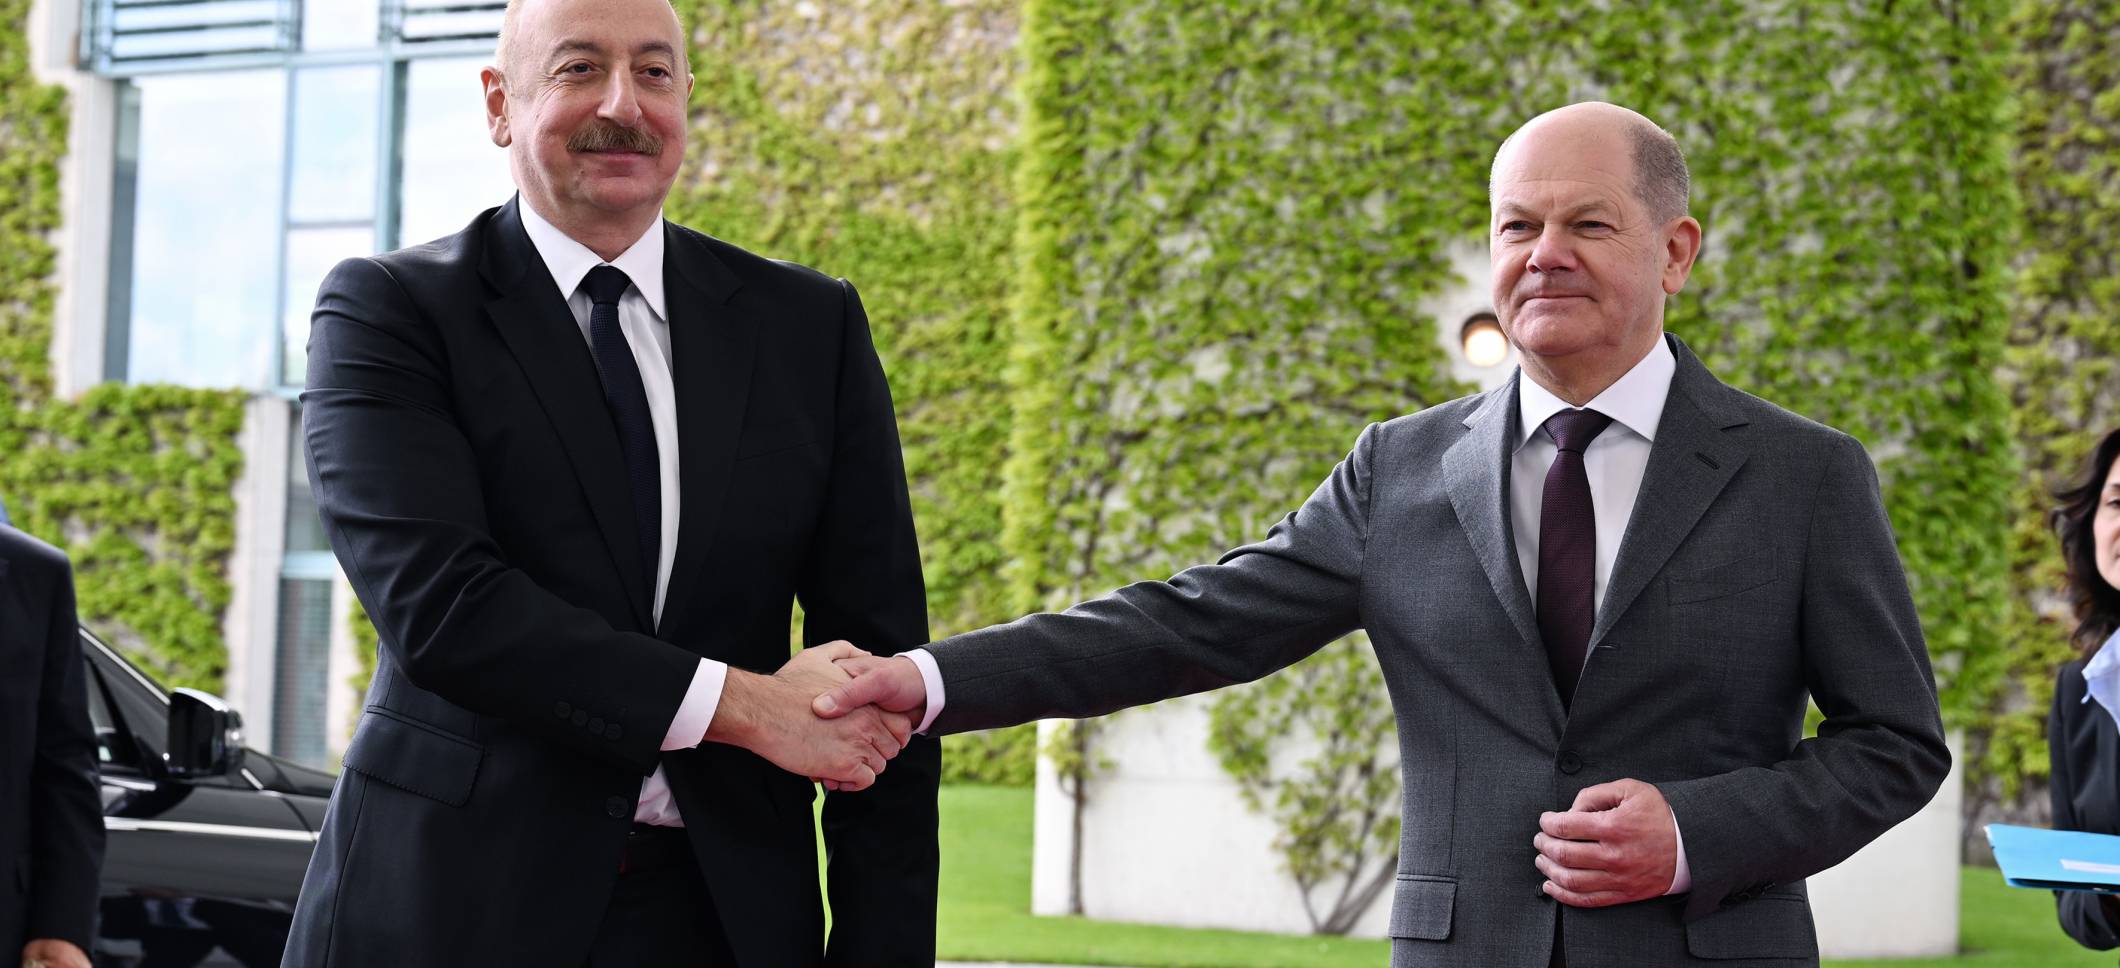 Ilham Aliyev held one-on-one meeting with Chancellor of Germany Olaf Scholz in Berlin